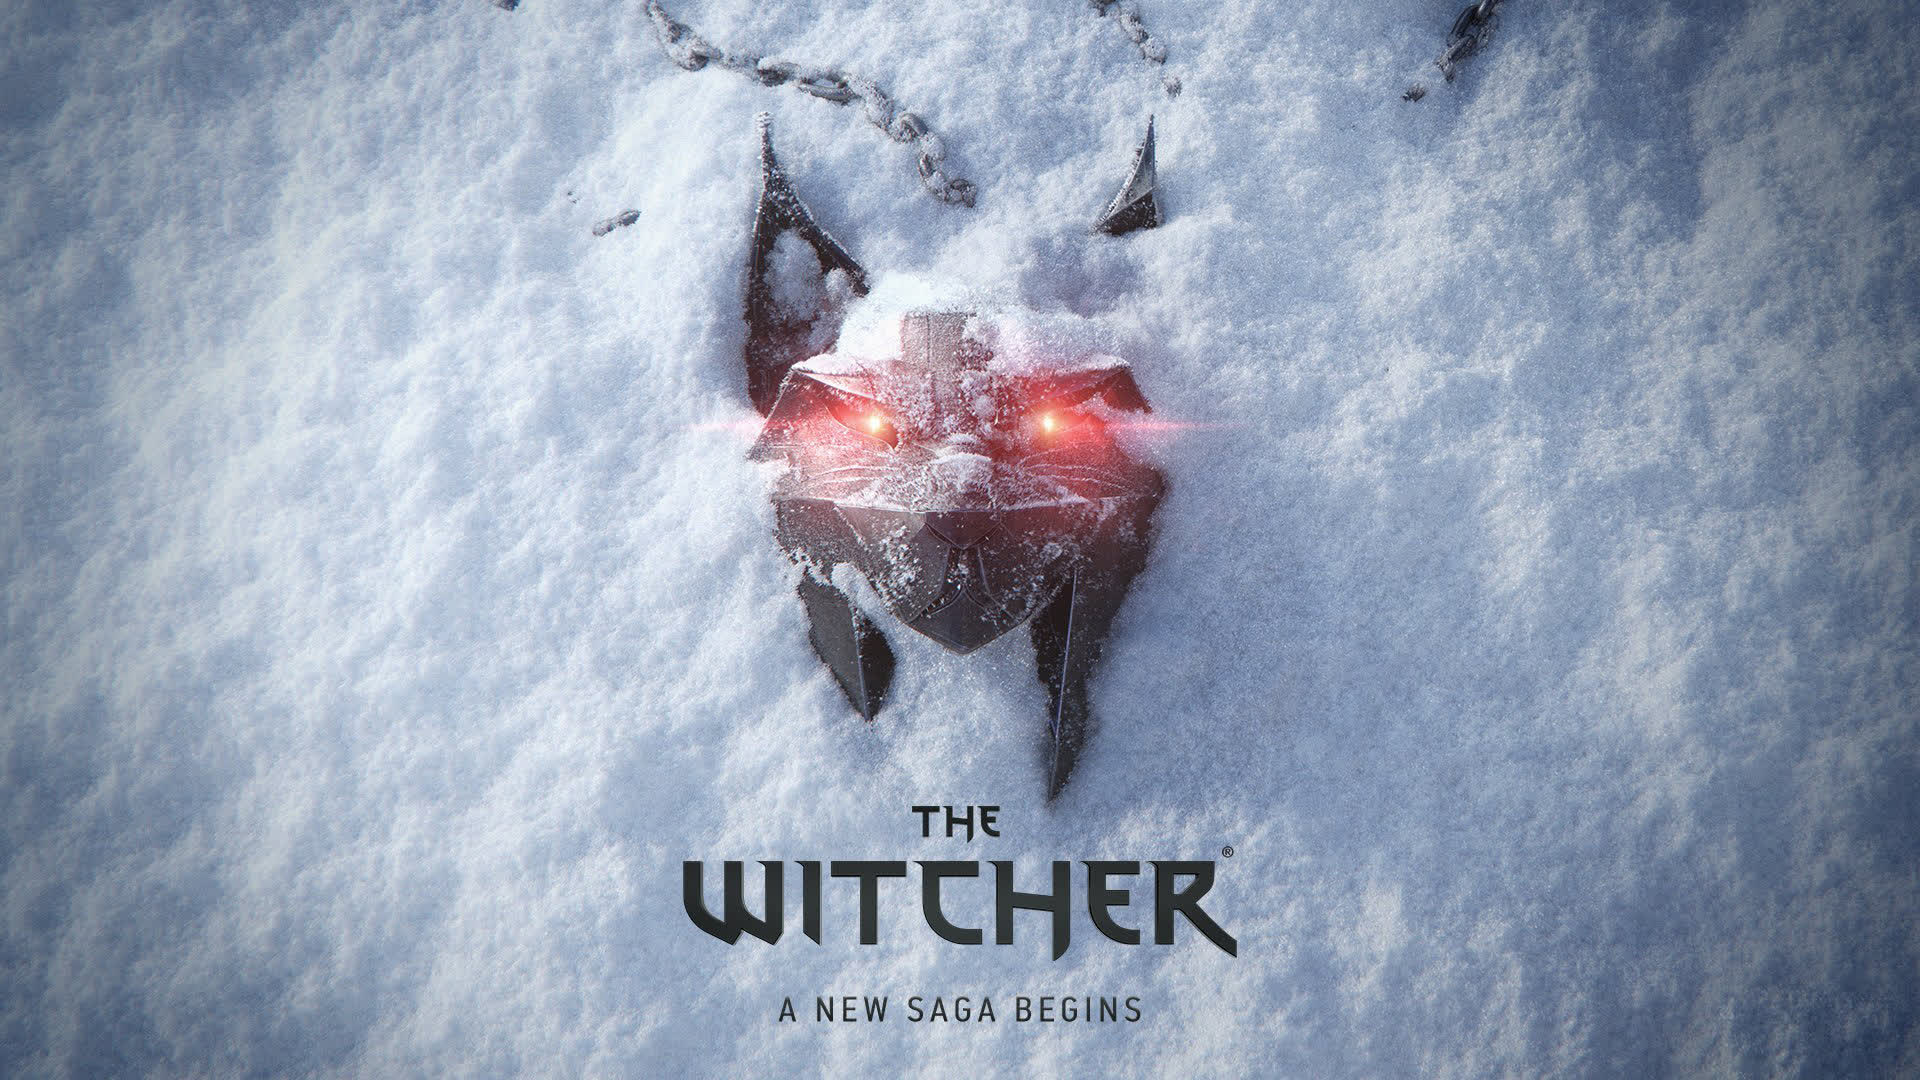 CD Projekt Red is working on a new Witcher game using Unreal Engine 5